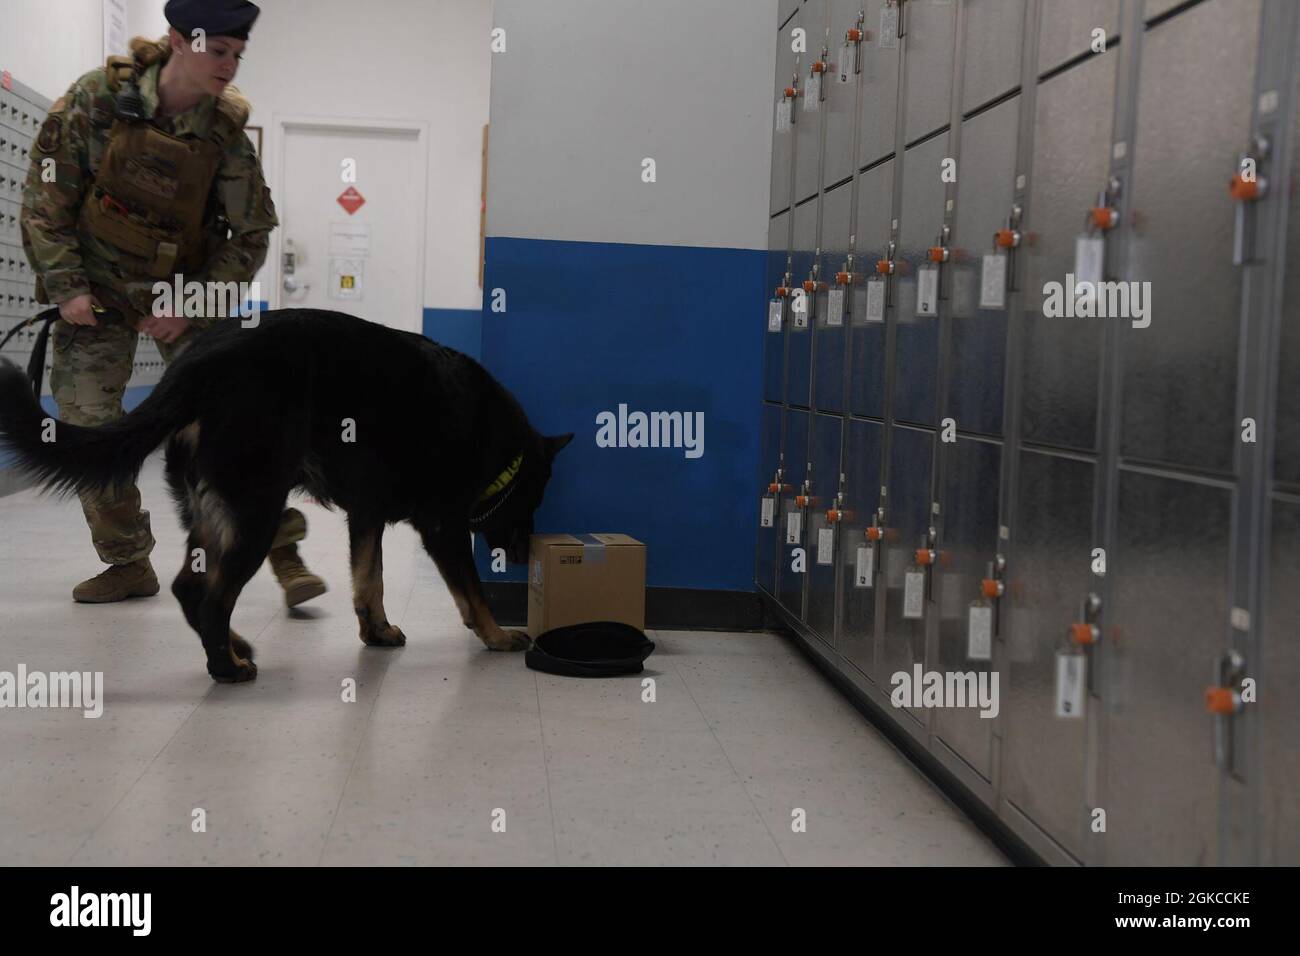 Staff Sgt. Samantha Champion, 51st Security Forces Squadron military  working dog handler, and MWD Zody, respond to a training event at Osan Air  Base, Republic of Korea, March 11, 2021. The training